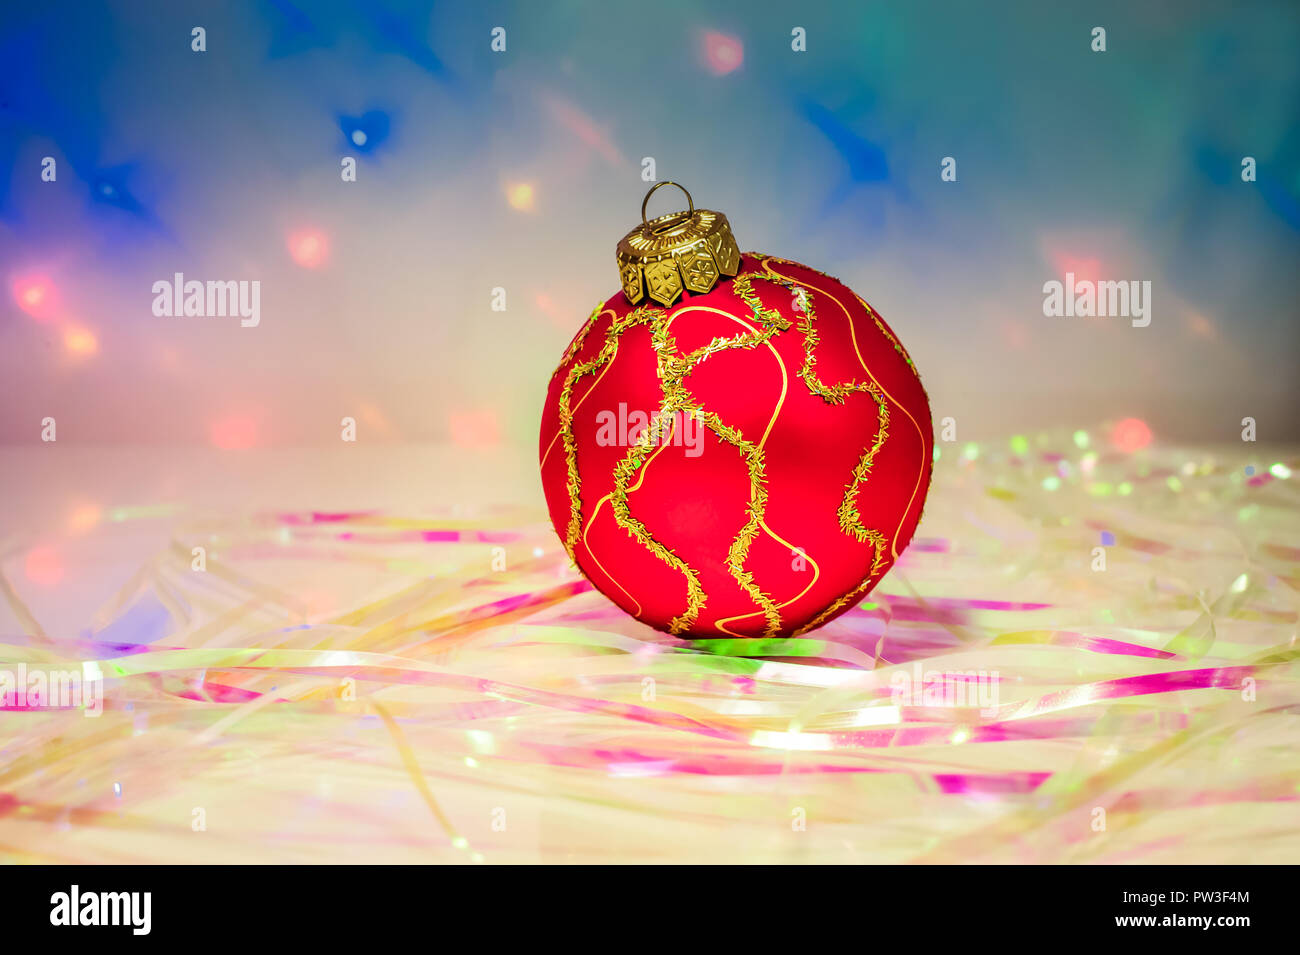 Red Christmas ball on the table Stock Photo